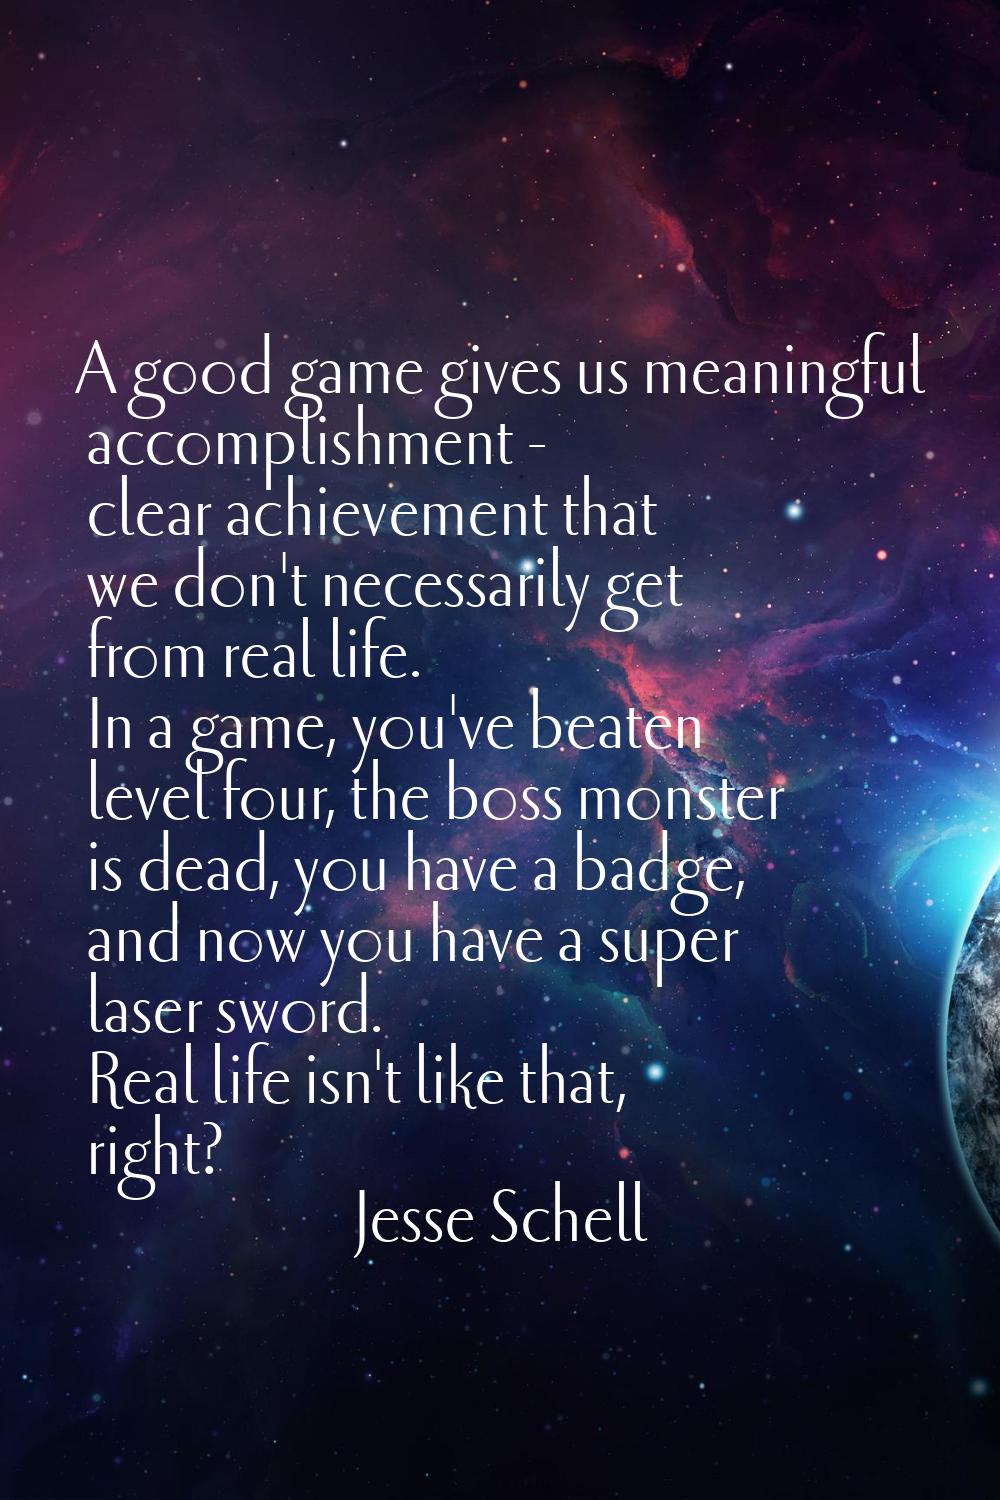 A good game gives us meaningful accomplishment - clear achievement that we don't necessarily get fr